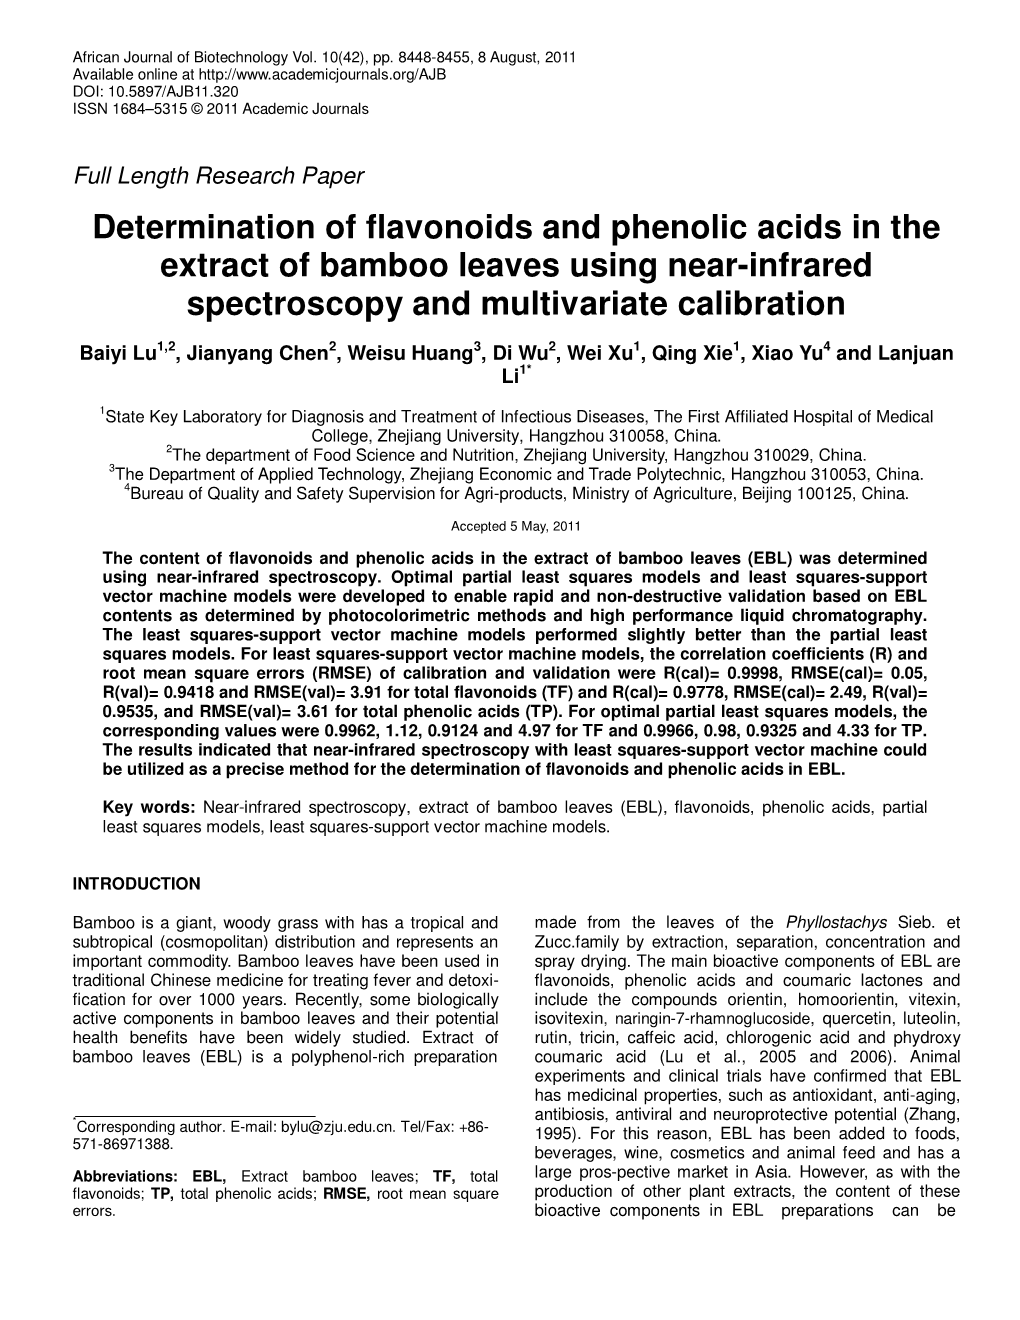 Determination of Flavonoids and Phenolic Acids in the Extract of Bamboo Leaves Using Near-Infrared Spectroscopy and Multivariate Calibration